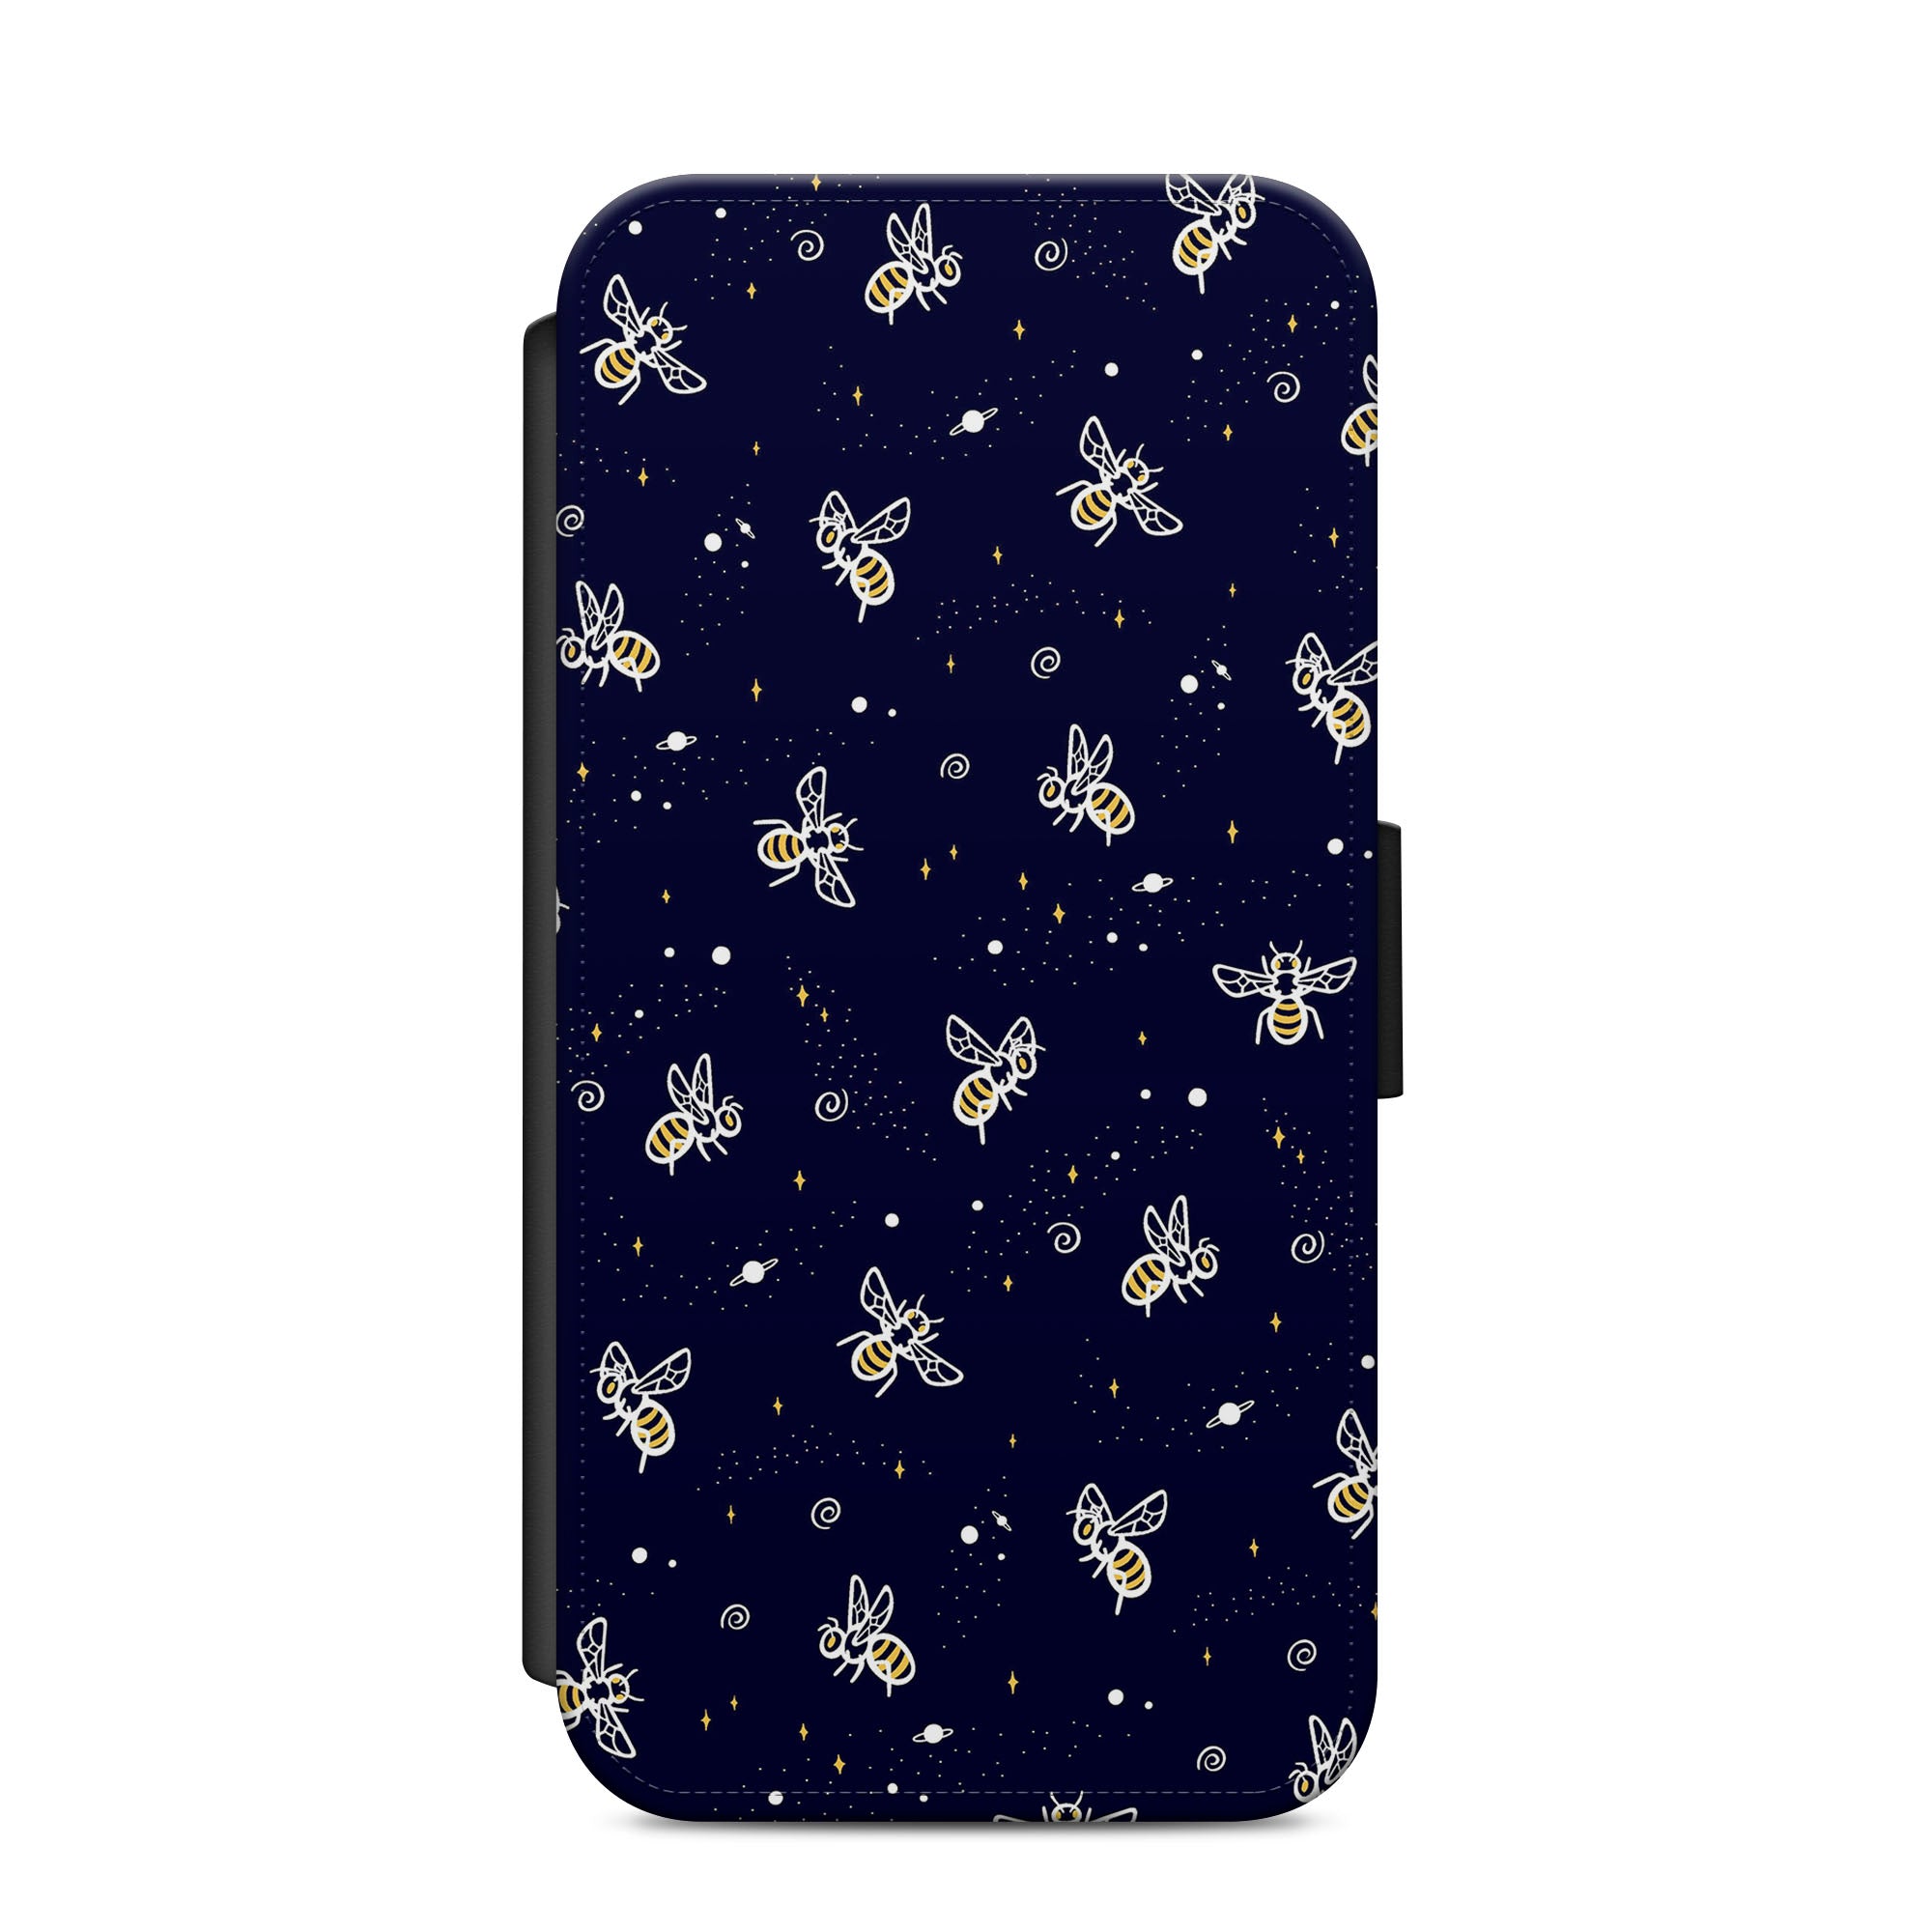 Cute Bumble Bee Bees Faux Leather Flip Case Wallet for iPhone / Samsung